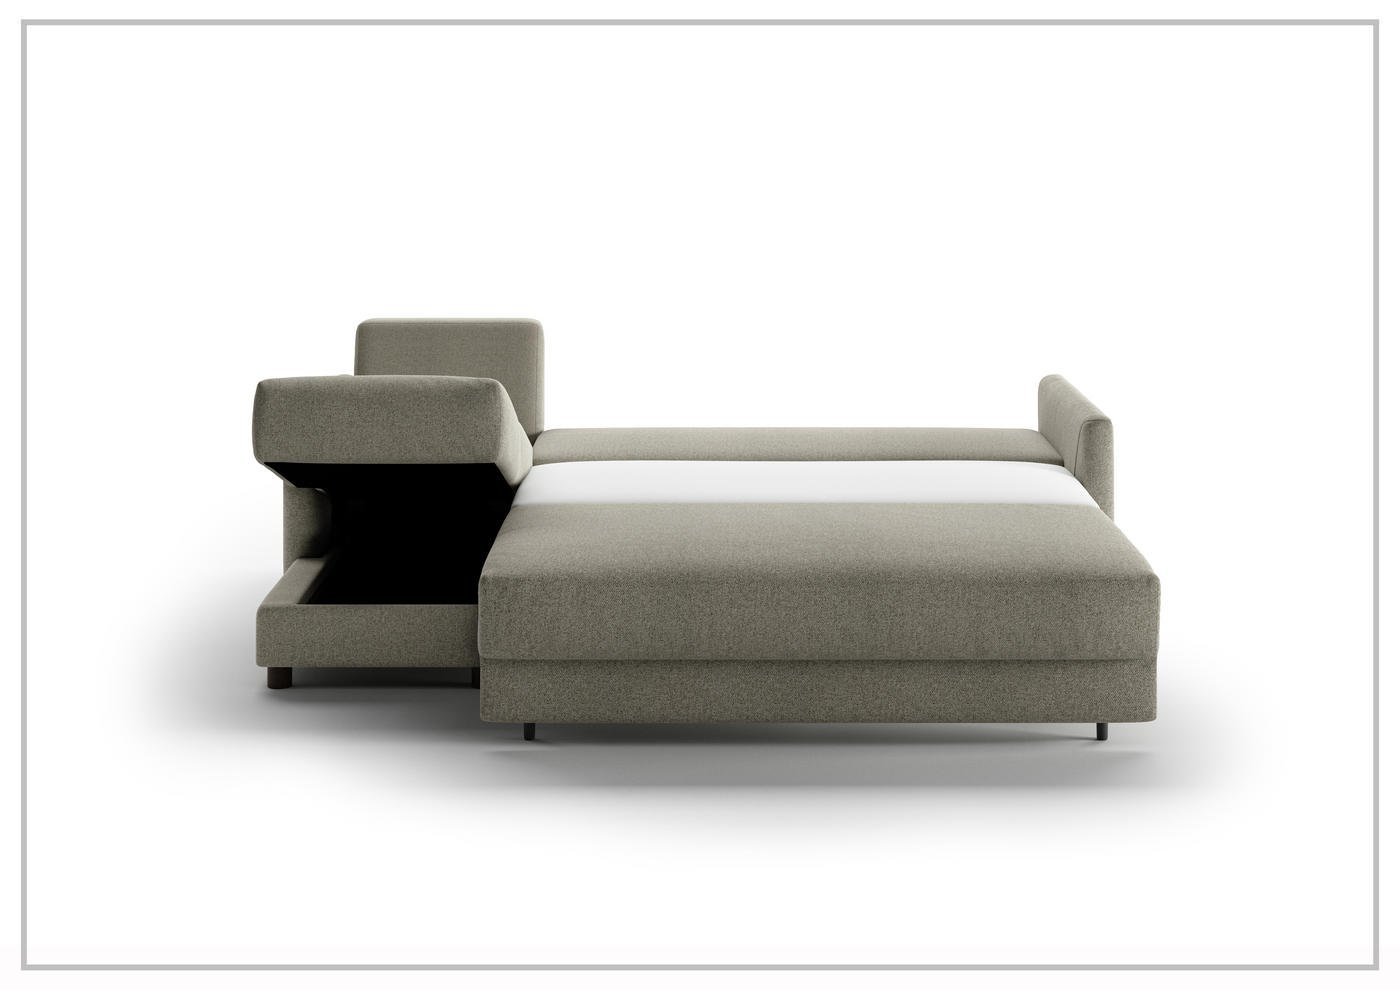 Luonto Pint L-Shaped Sectional Sleeper Sofa with Storage